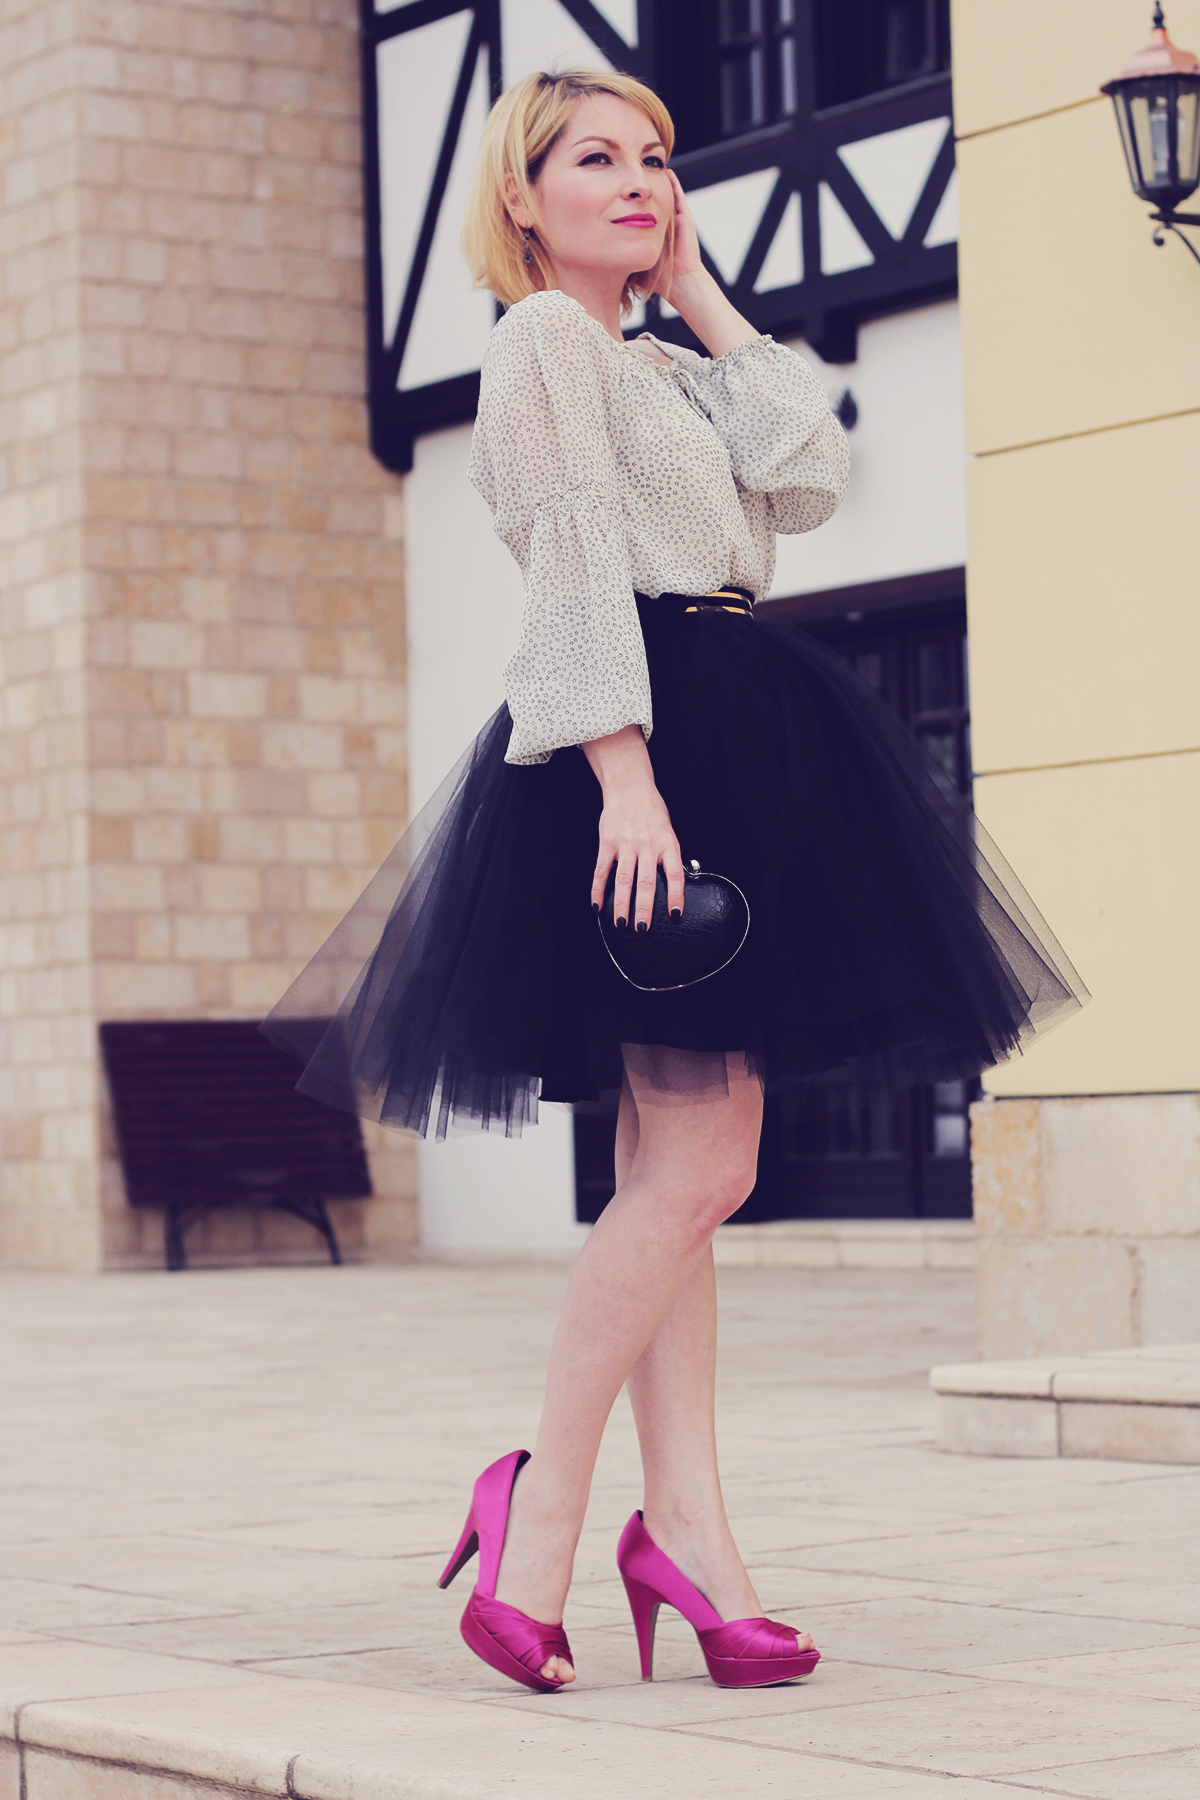 the tulle skirt and pink pumps_3